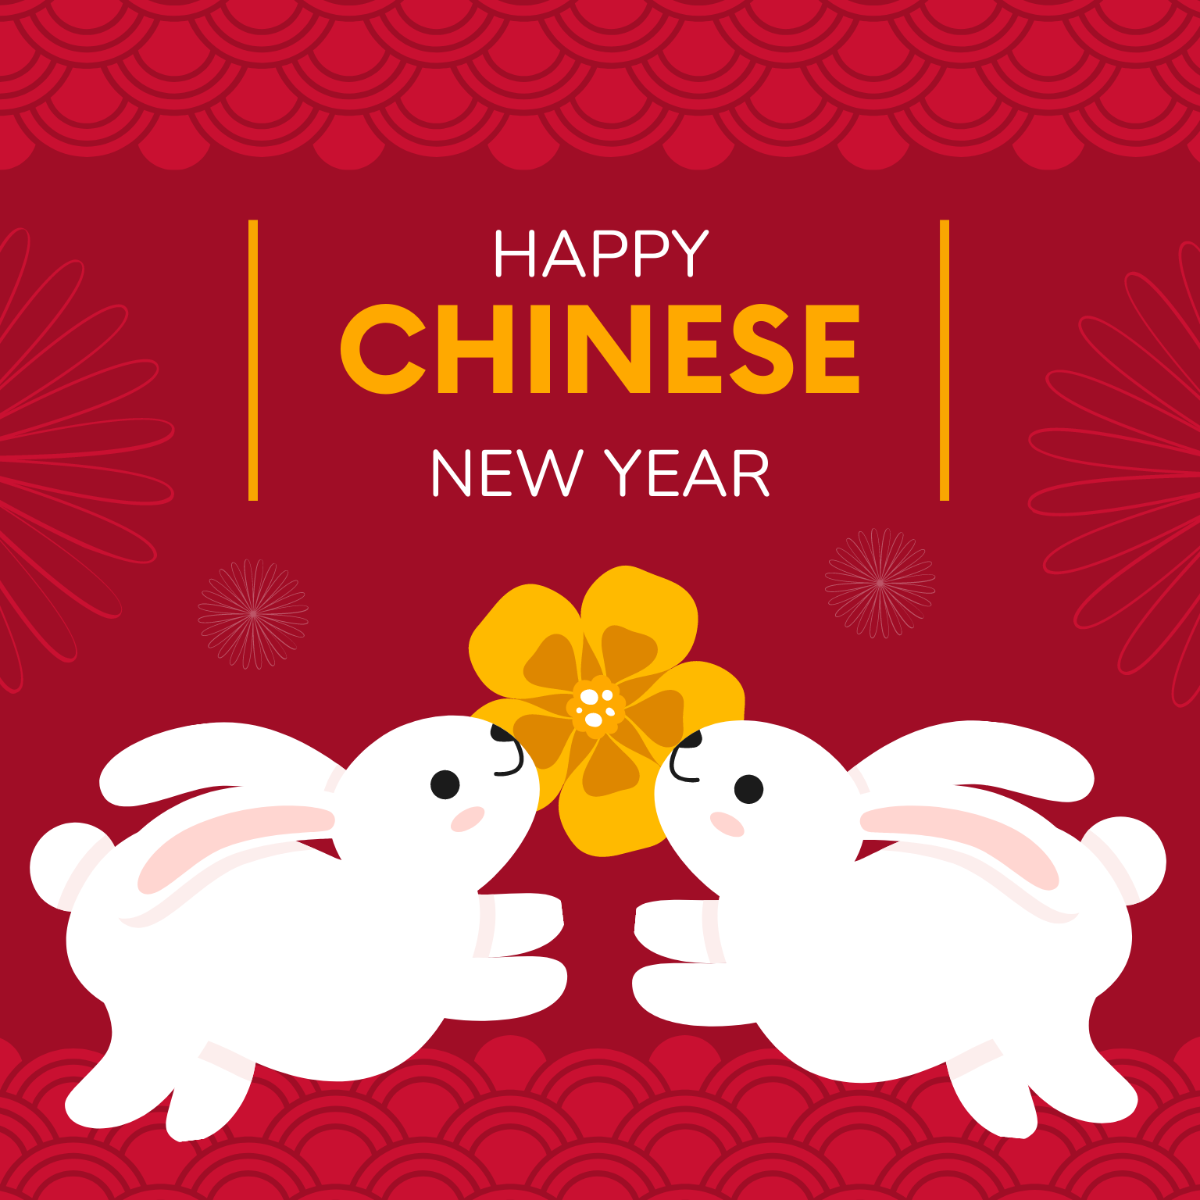 Free Happy Chinese New Year Illustration Template